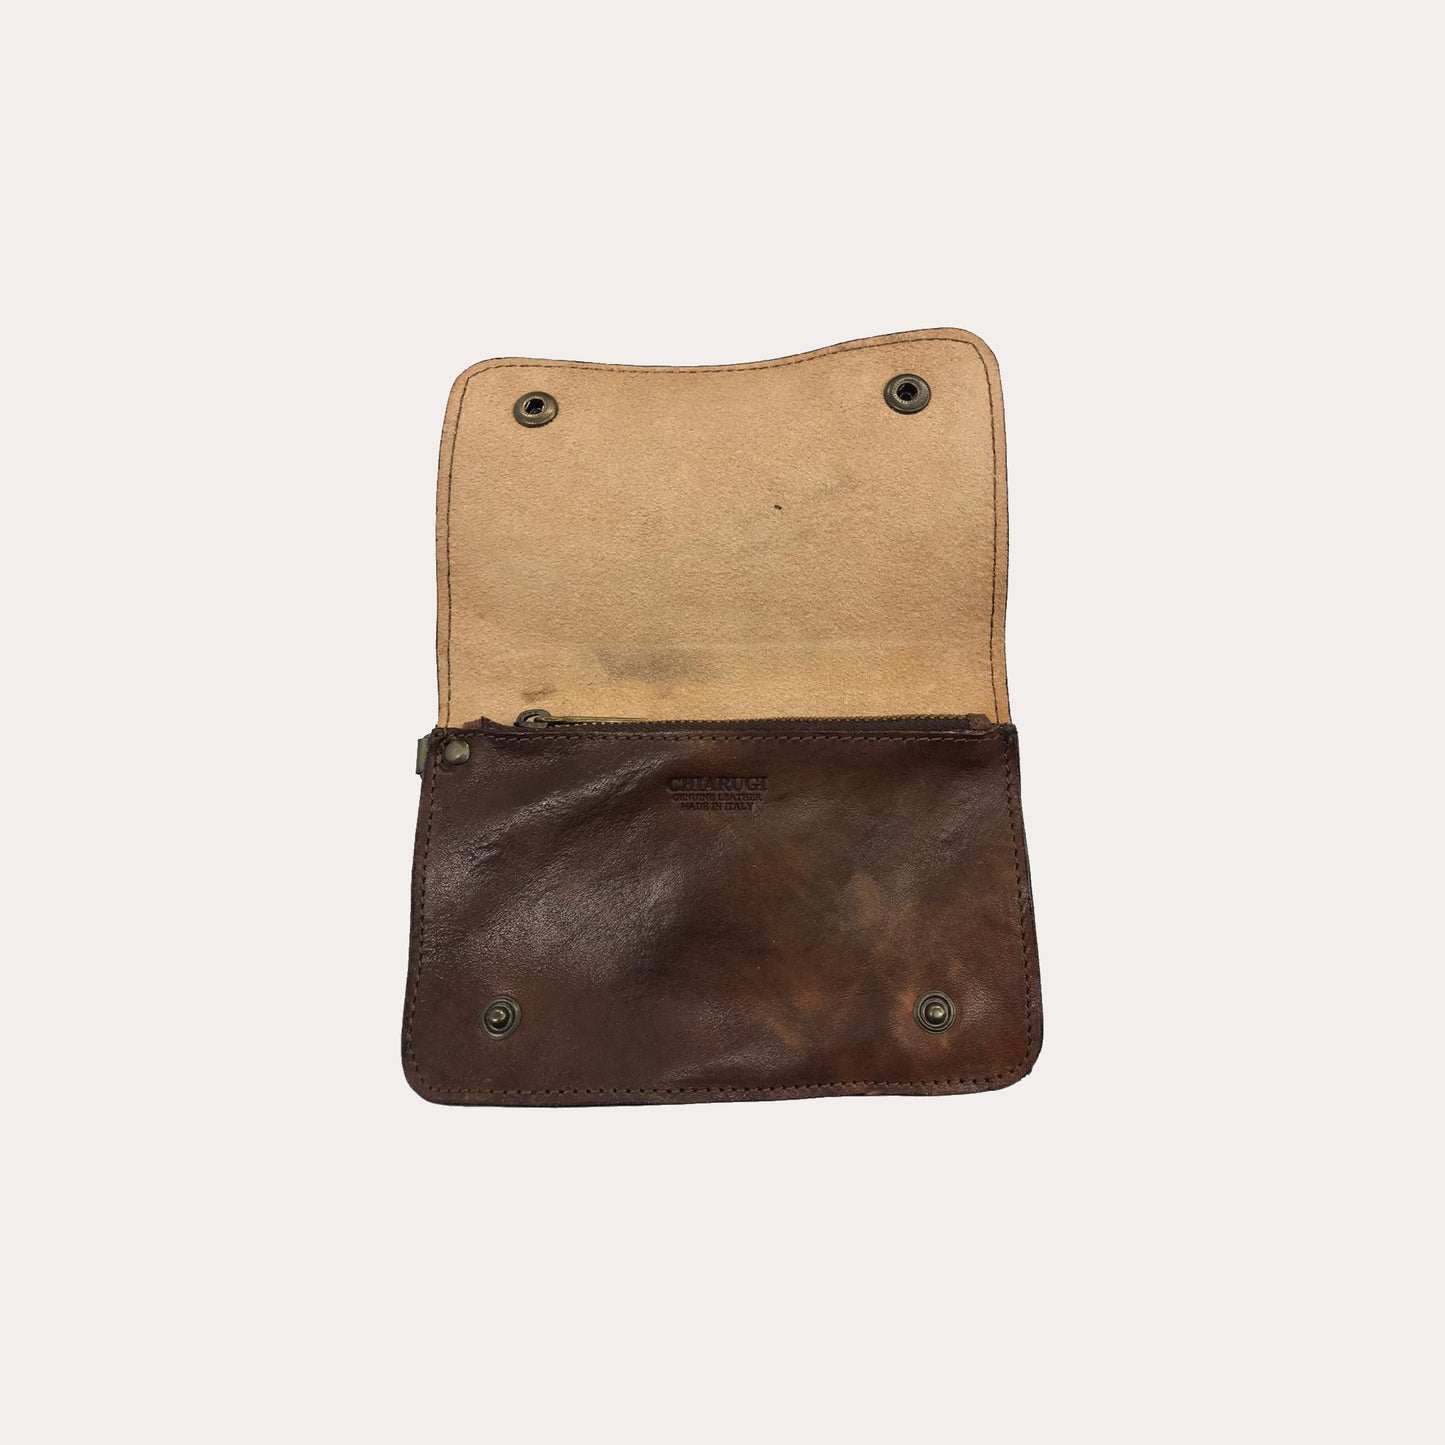 Chiarugi Brown Leather Flap Over Purse